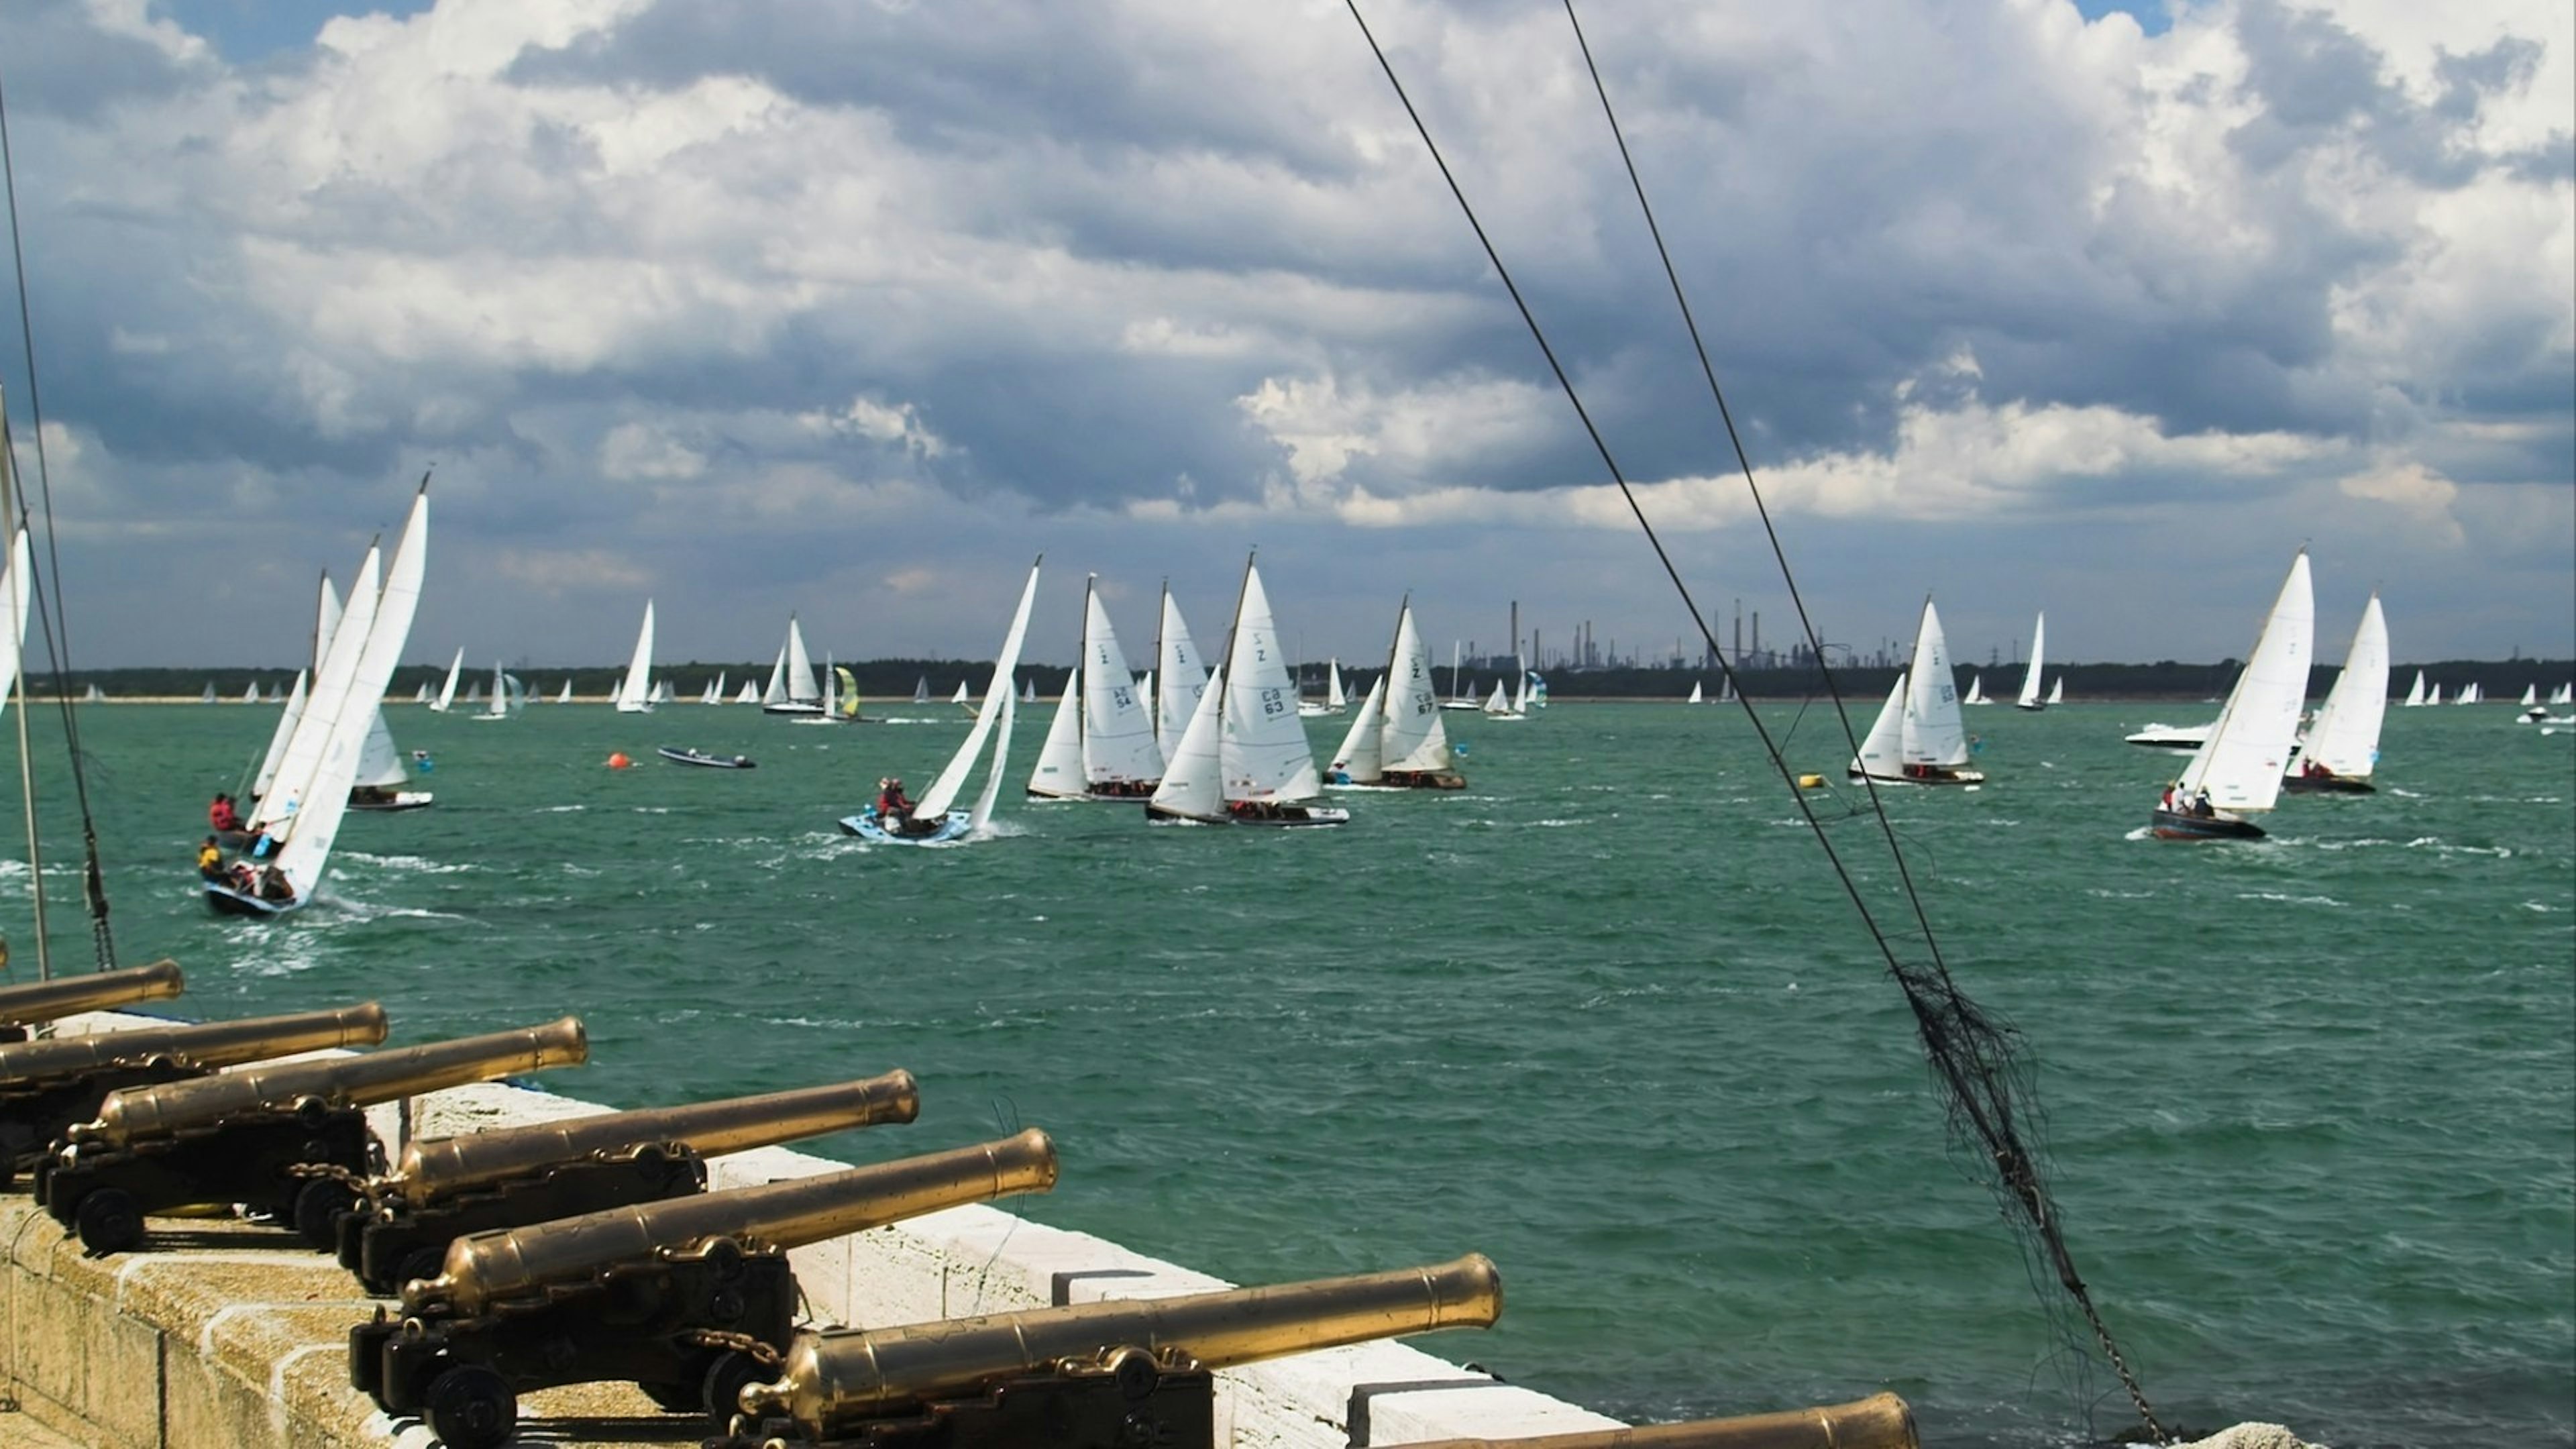 Sailing race at Cowes